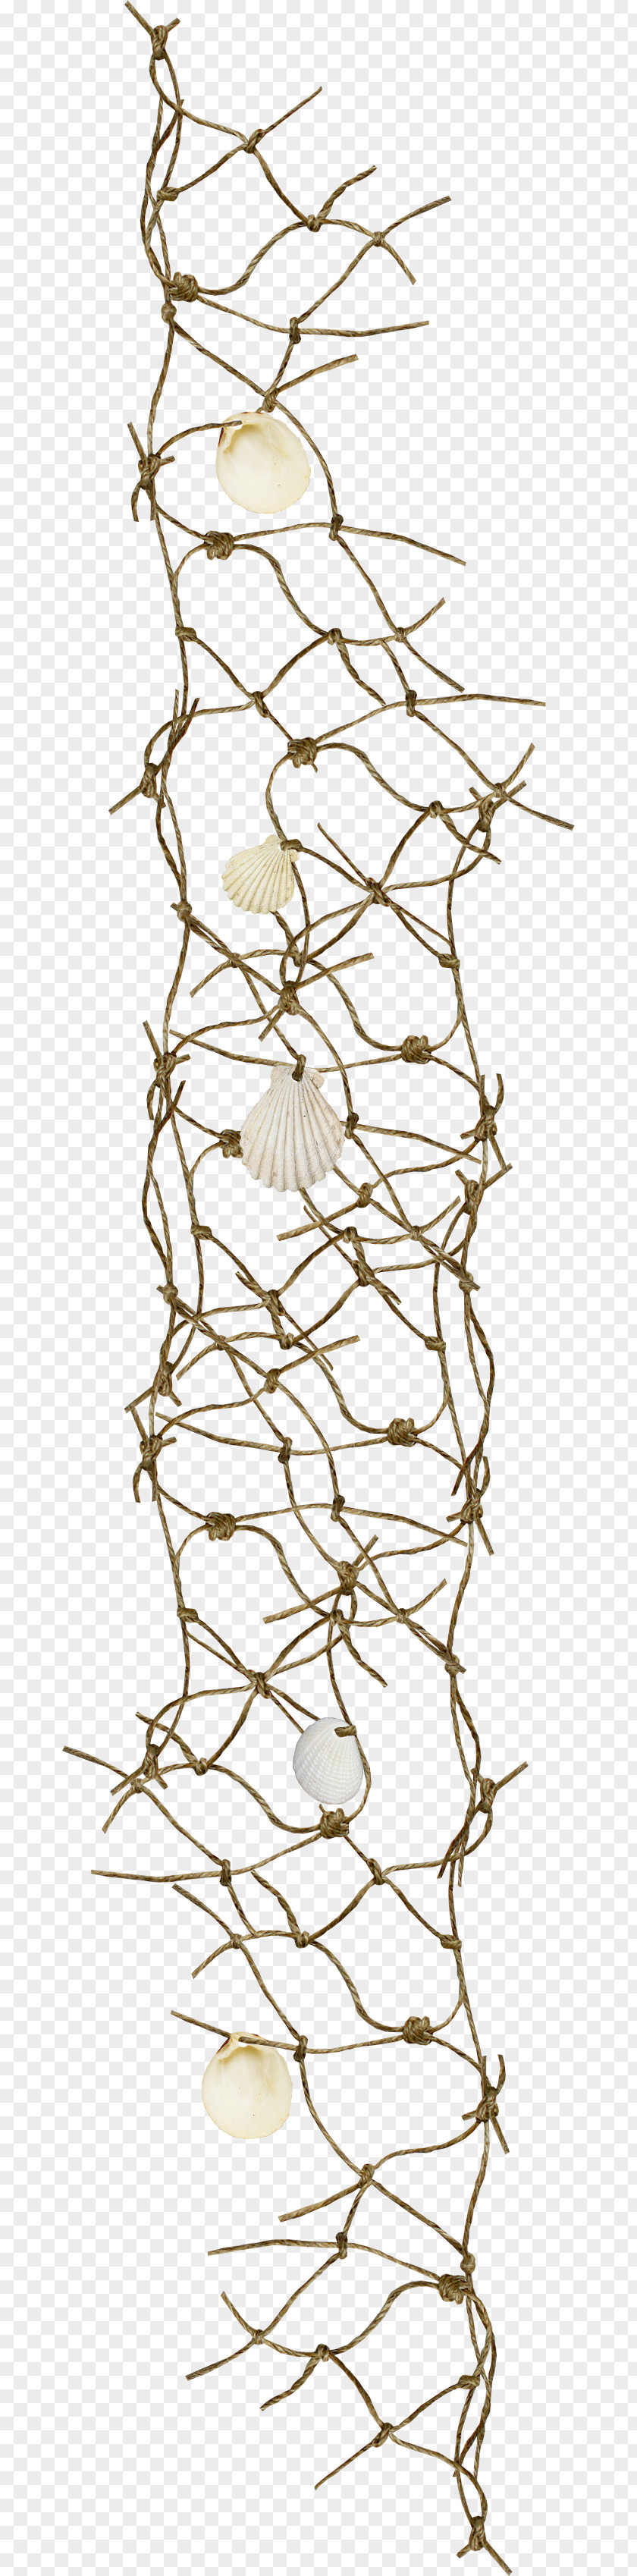 Brown Rope Nets Scallop Fishing Net Clip Art PNG